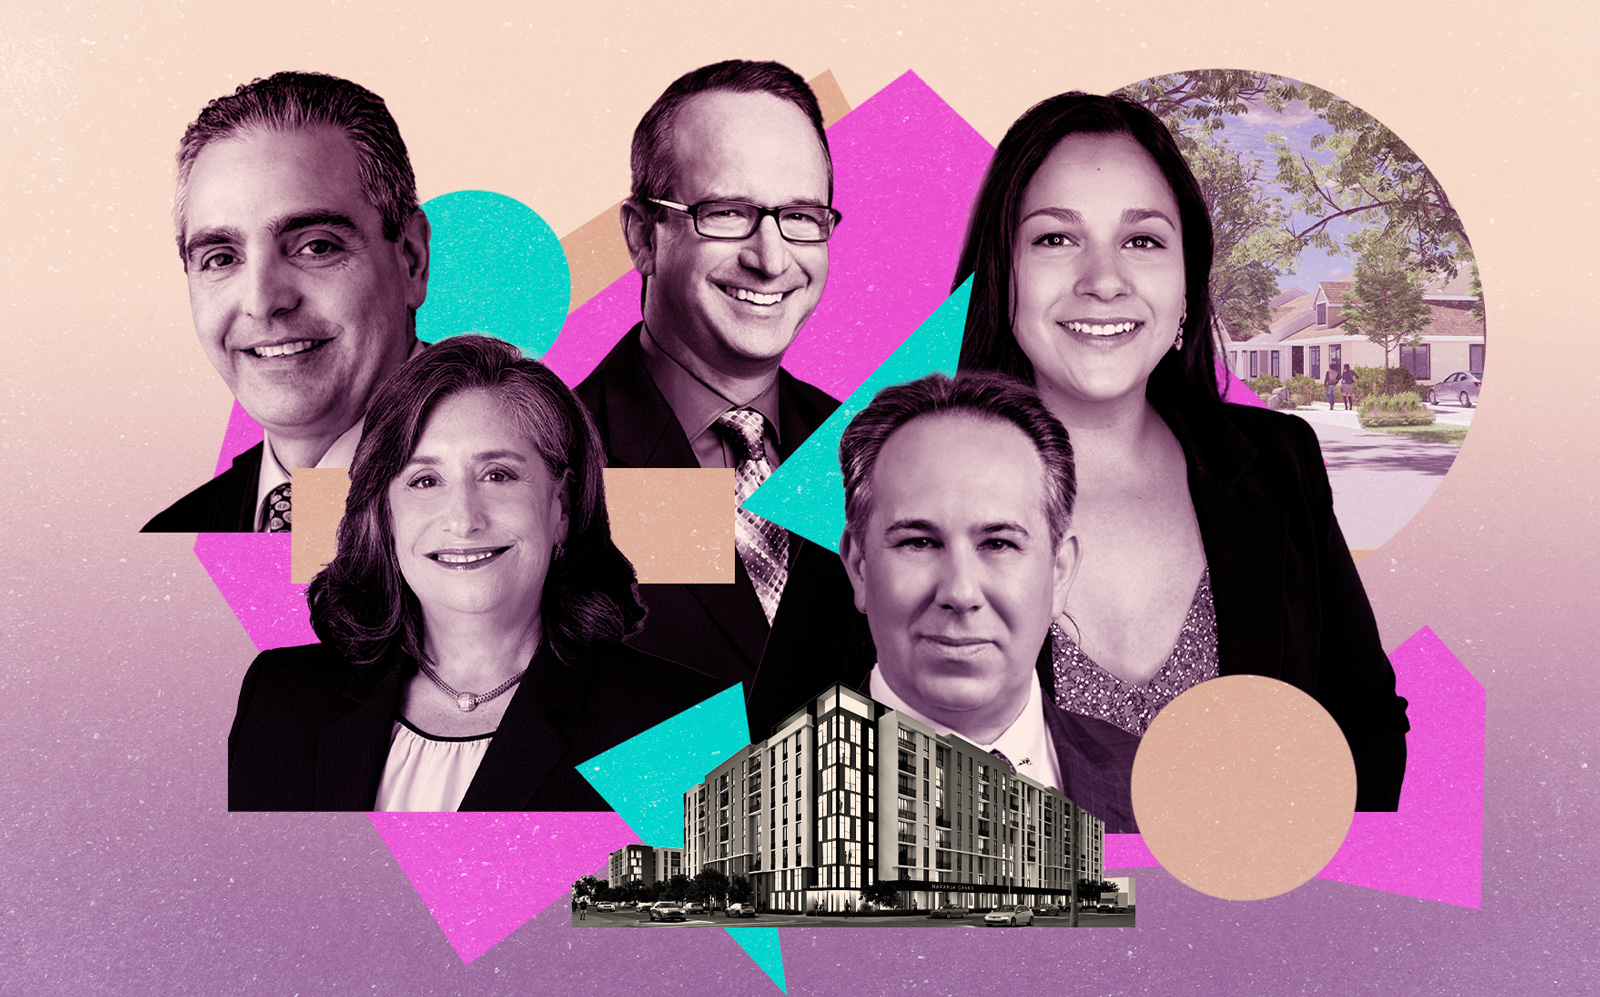 Clockwise from top left: Related Urban’s Albert Milov, Pinnacle Housing’s Tim Wheat, Housing Trust Group’s Dilia, Government Law Group’s Keith Poliakoffv Taborav and Holland & Knight’s Debbie Orshefsky